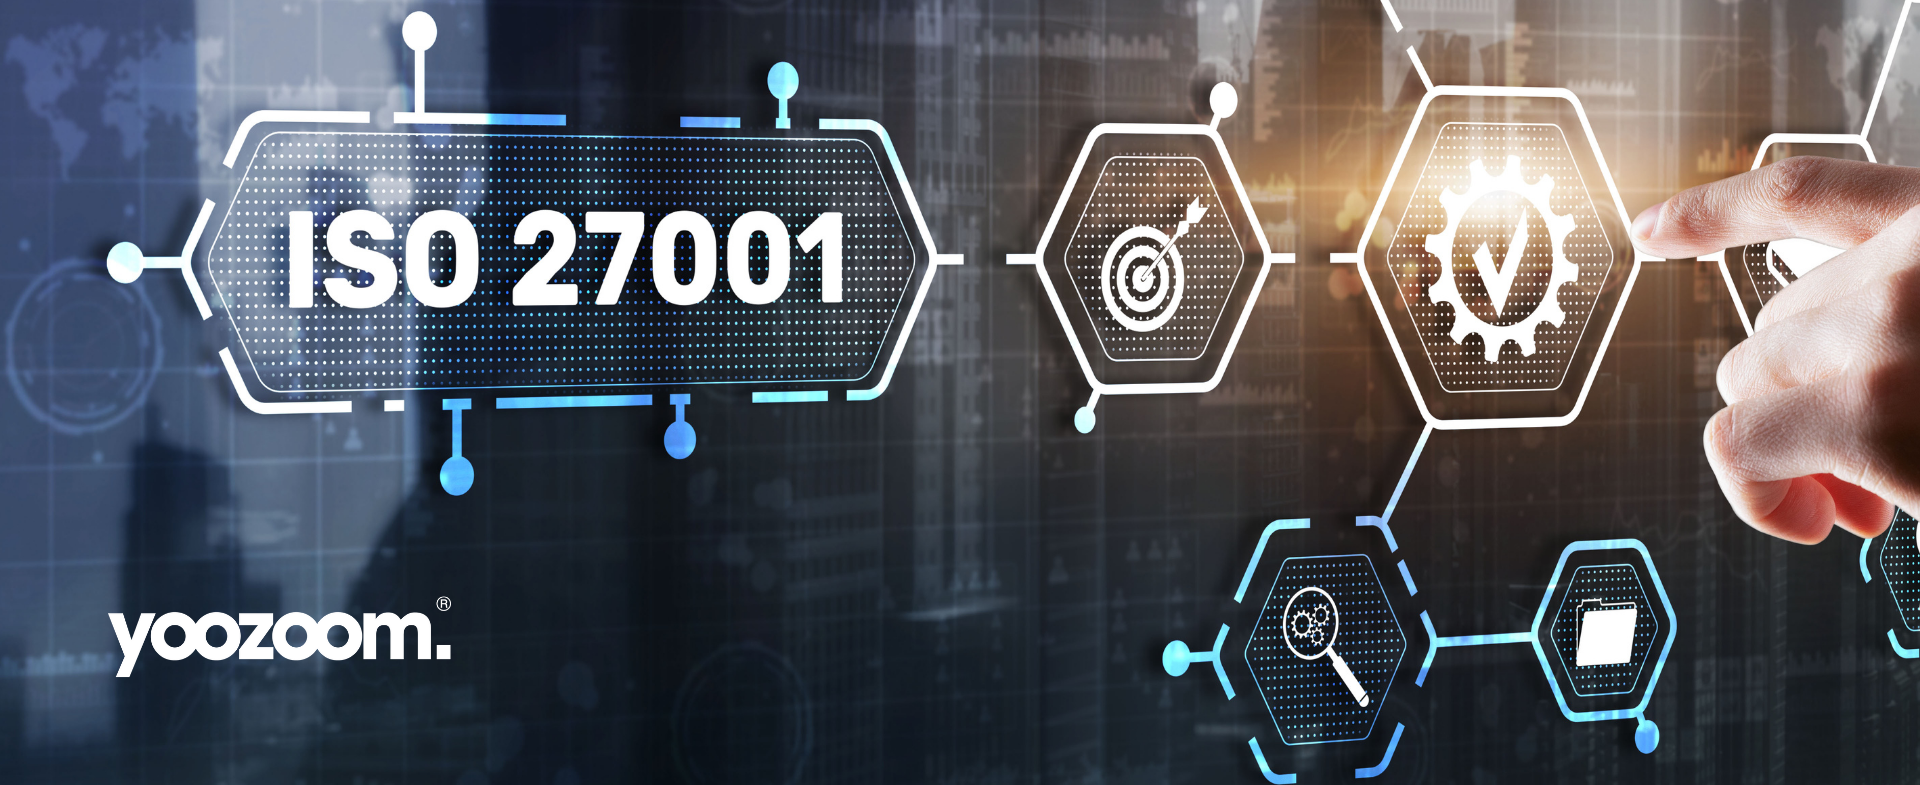 Is ISO 27001 right for you? How long does it take? Get all the answers in our ultimate beginners' guide to ISO 27001 cybersecurity certification.